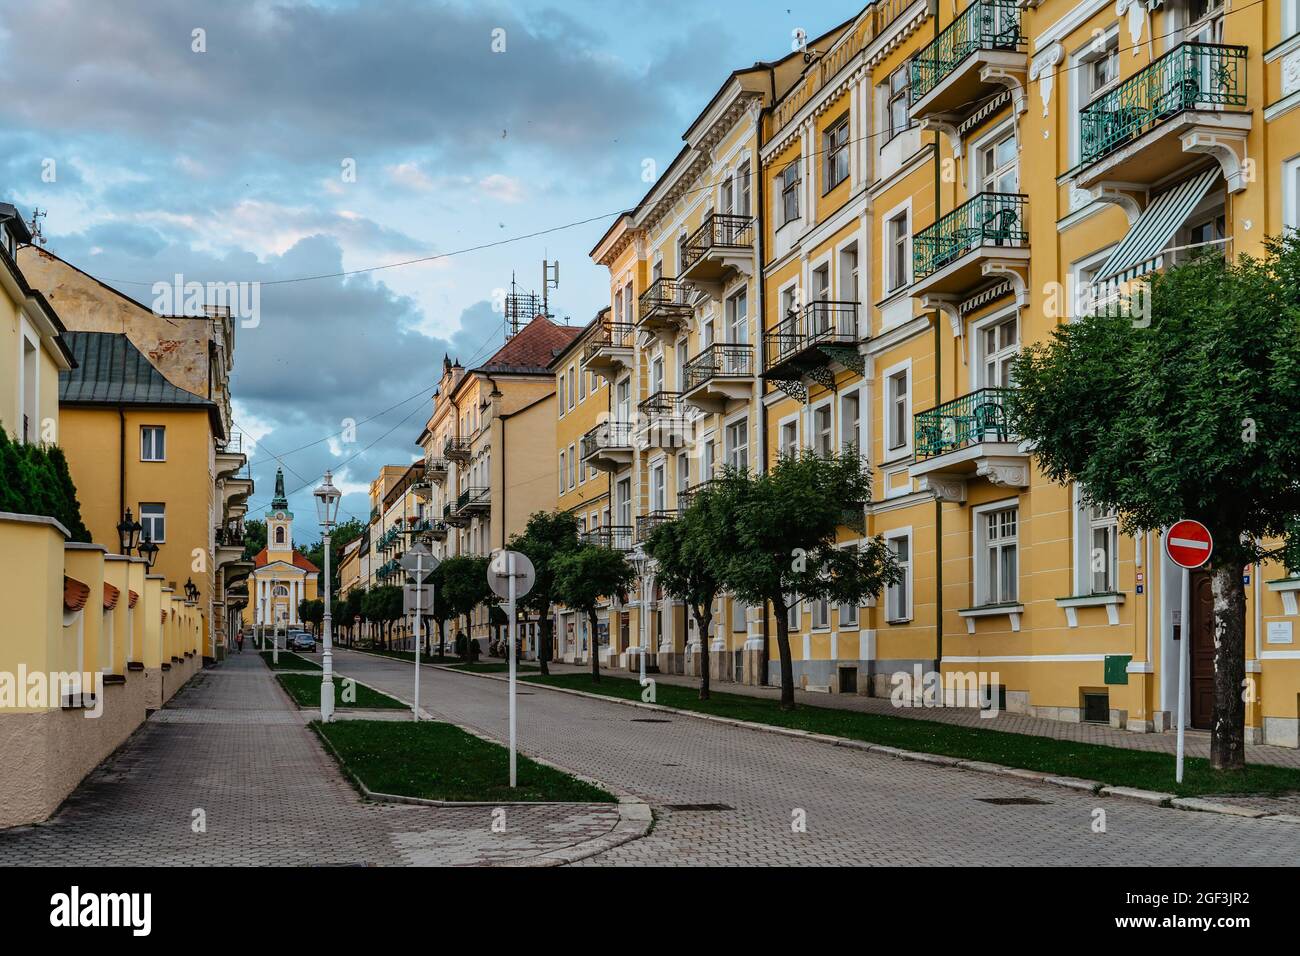 Frantiskovy Lazne-Czech Republic - August 20, 2021.Lovely spa town in West Bohemia,thermal buildings with typical yellow facade,neo-Classical colonnad Stock Photo